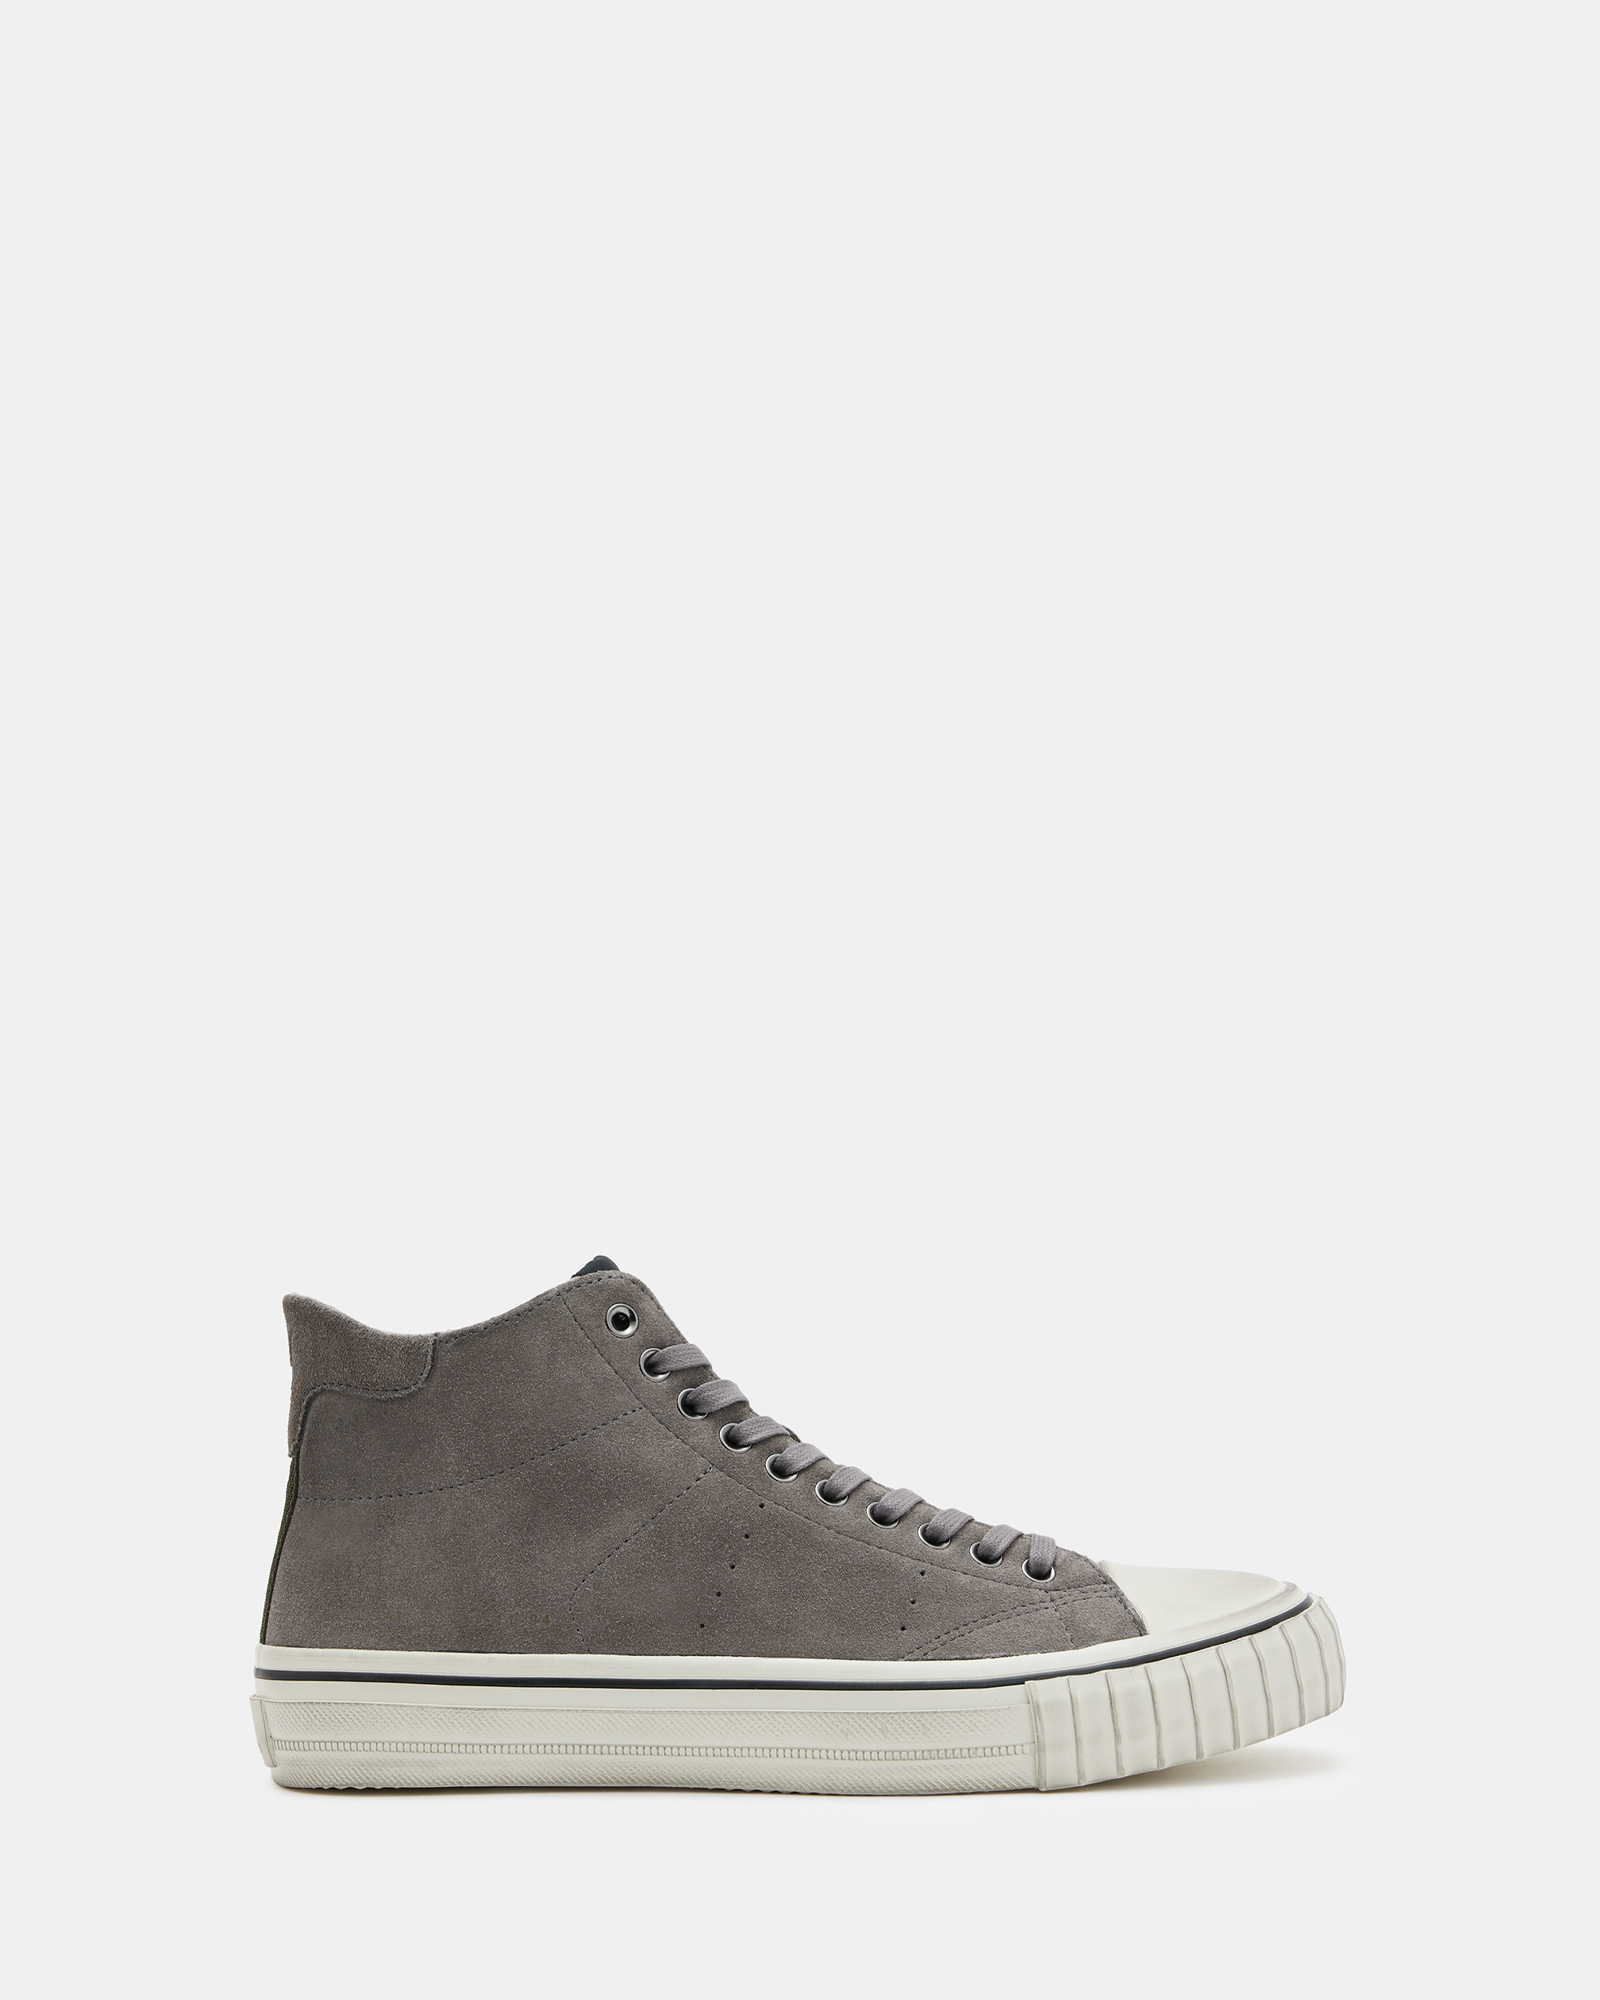 AllSaints Lewis Lace Up Suede High Top Trainers,, Dark Grey